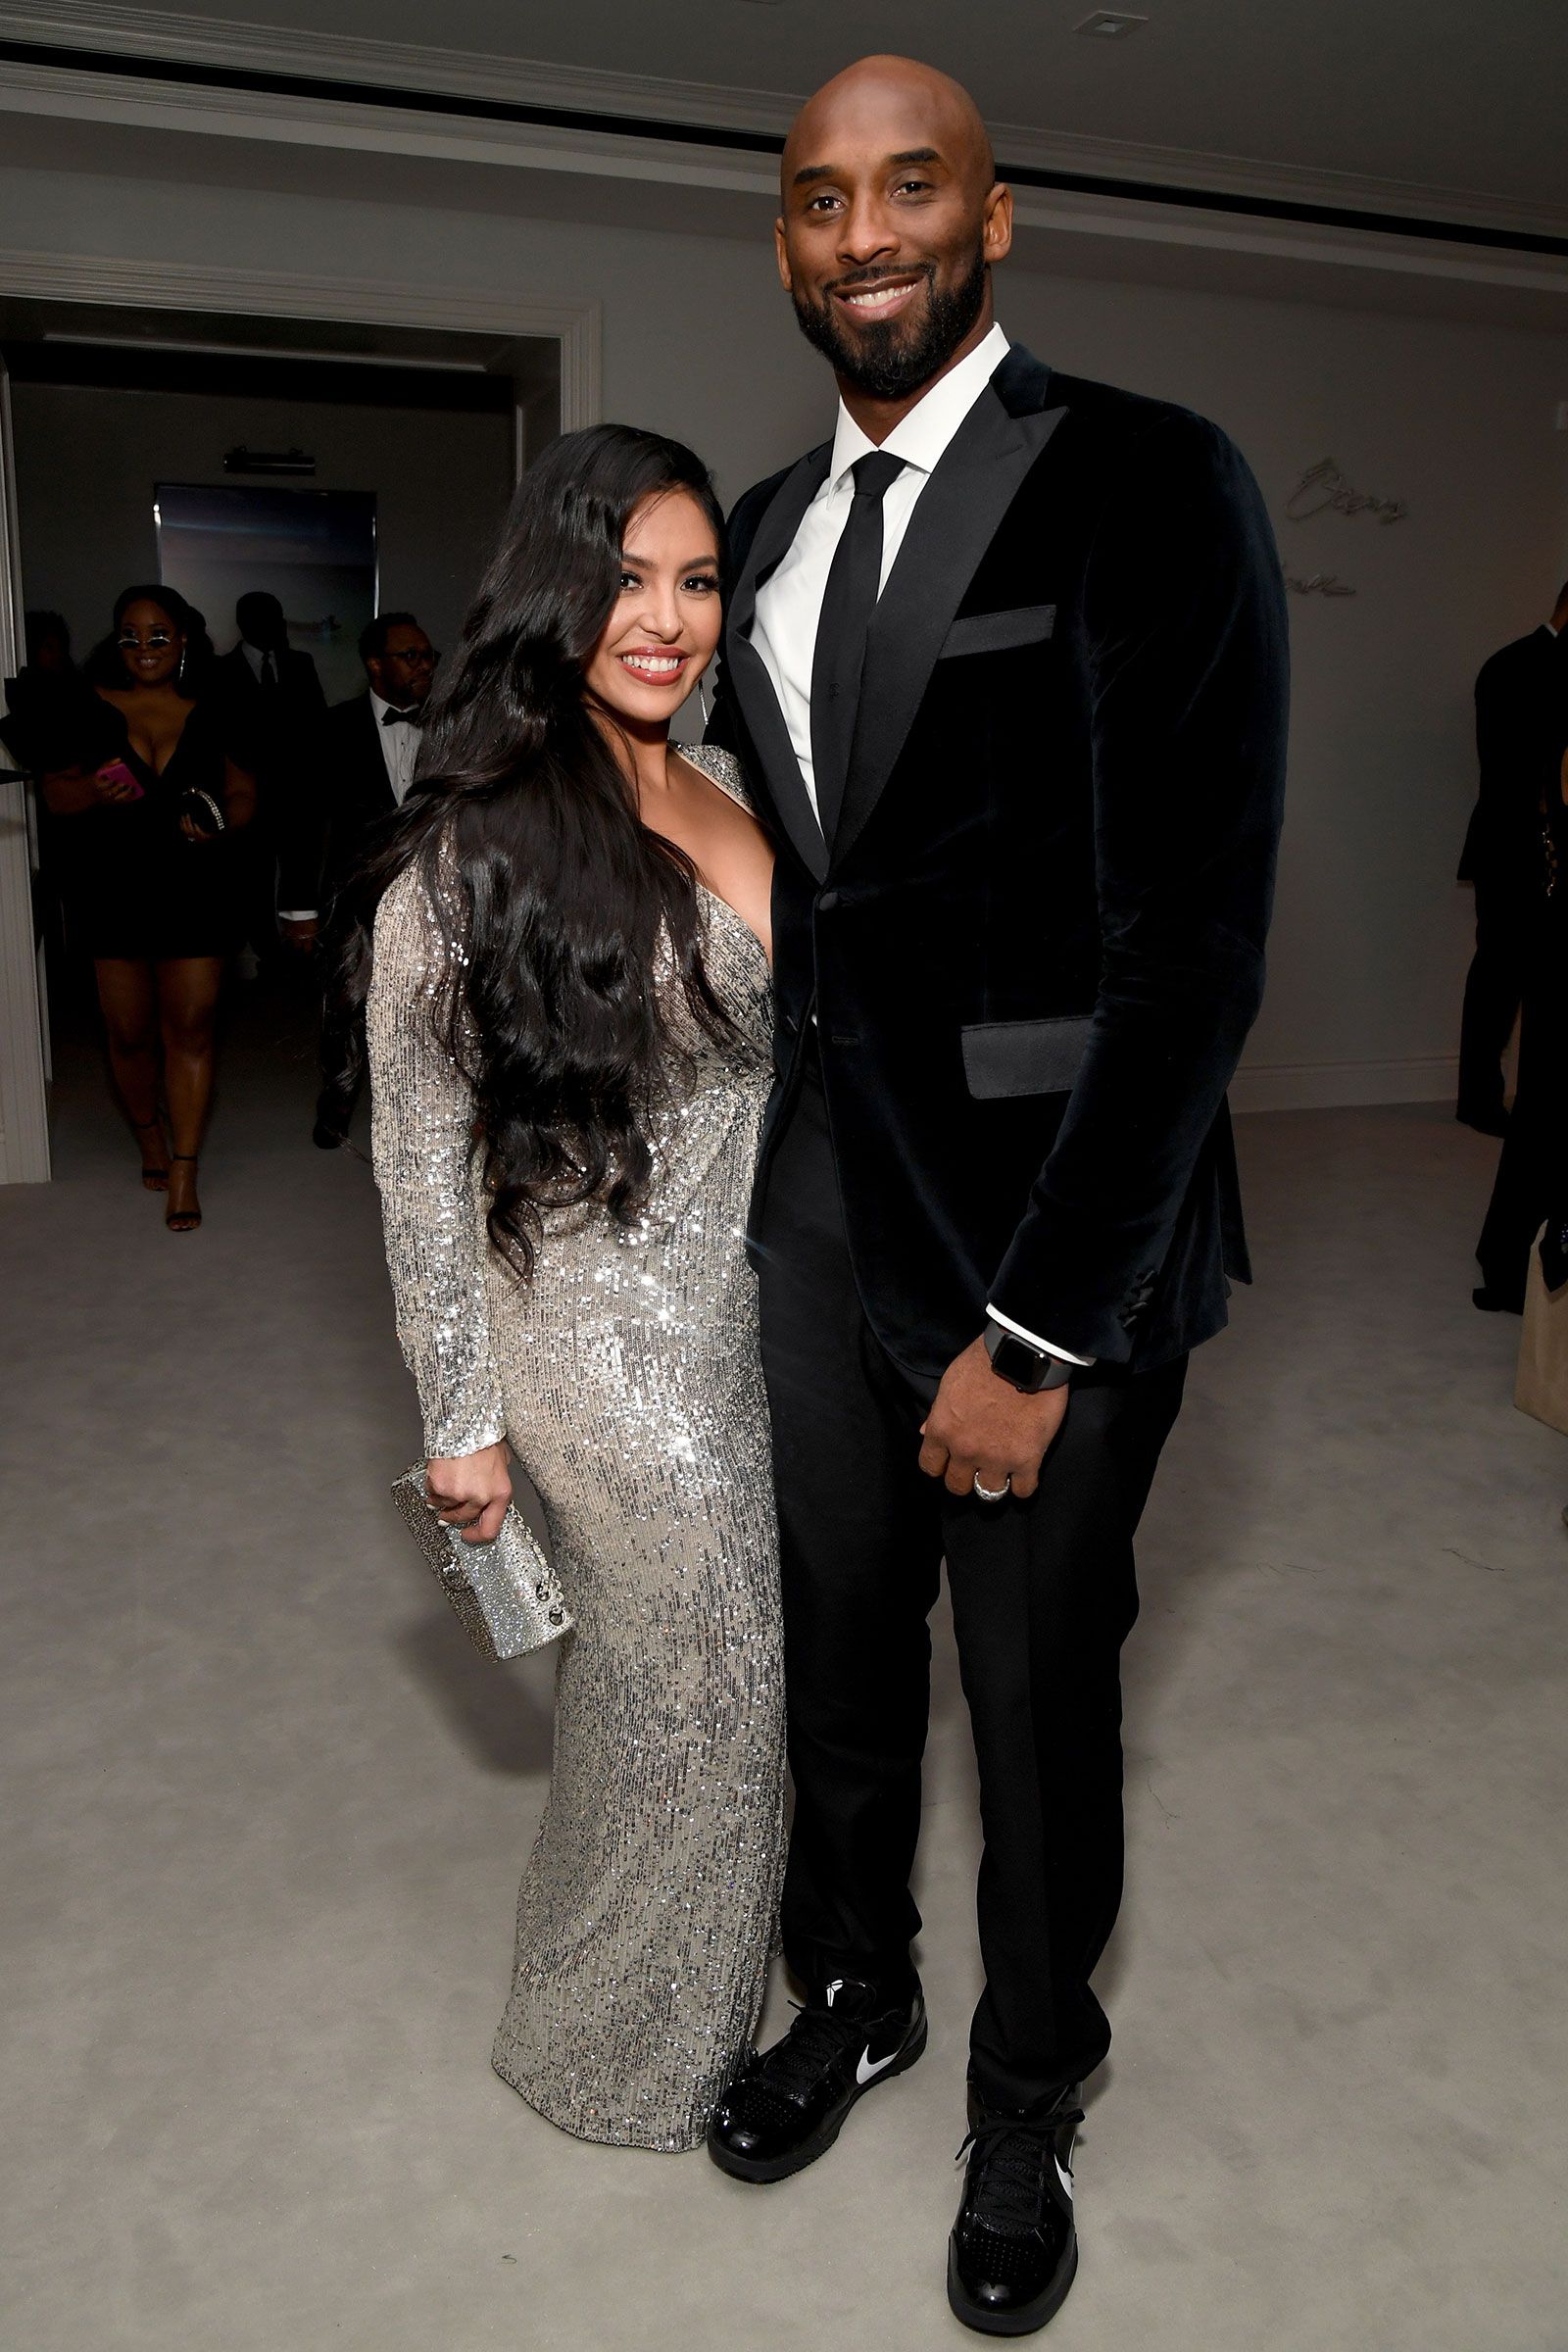 Vanessa Bryant Responds To Meek Mill's Insensitive Lyric About